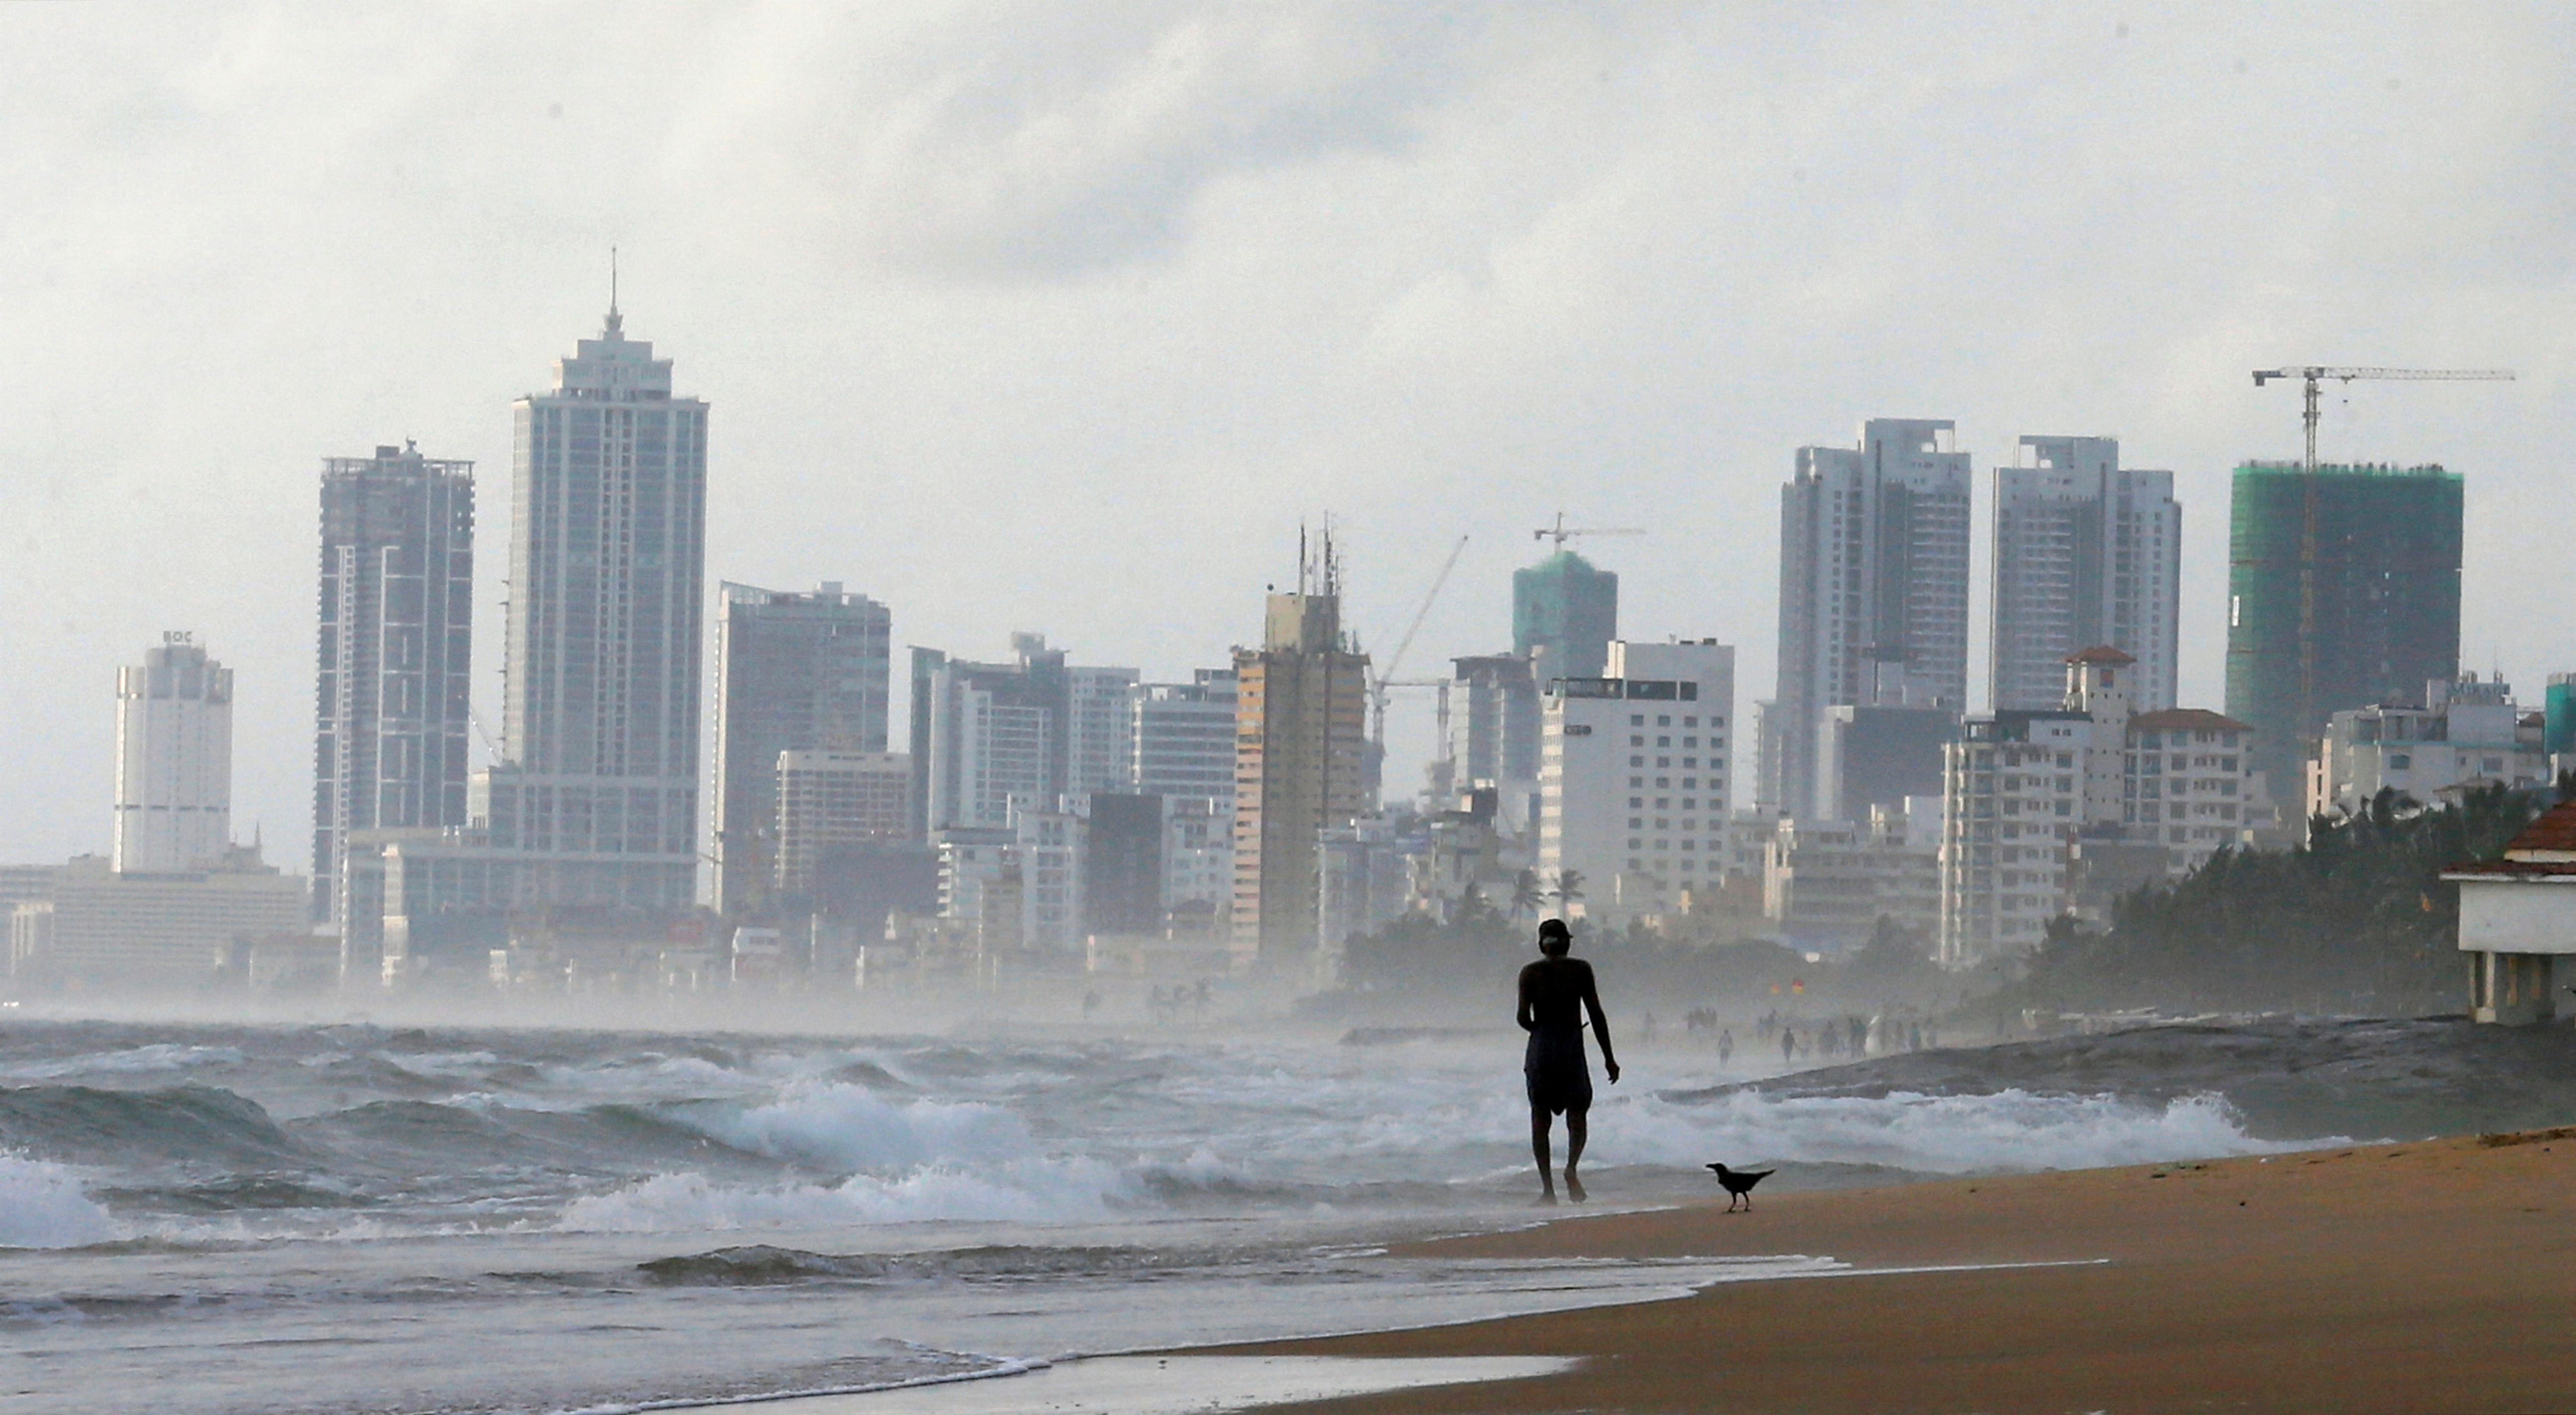 A man walks along a beach, against the backdrop of Colombo's Financial City